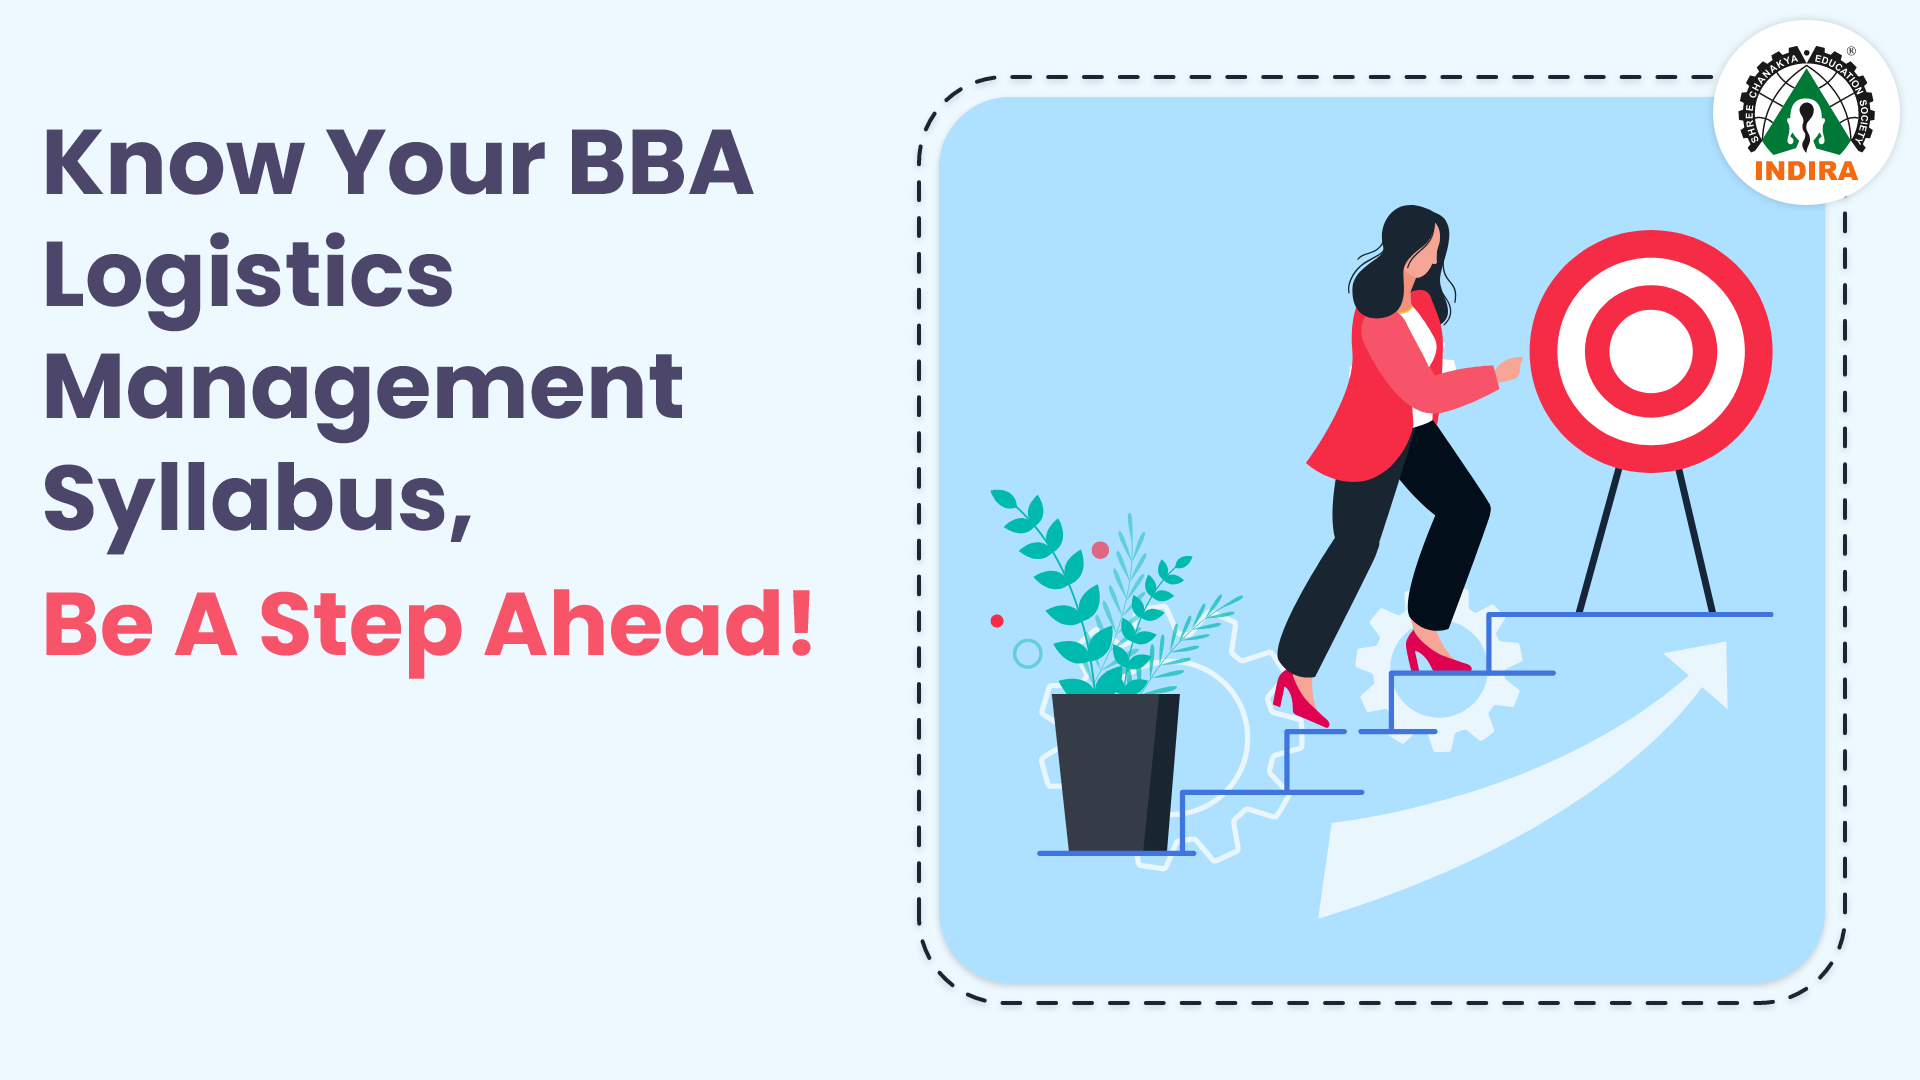 Know Your BBA Logistics management Syllabus, Be A Step Ahead!